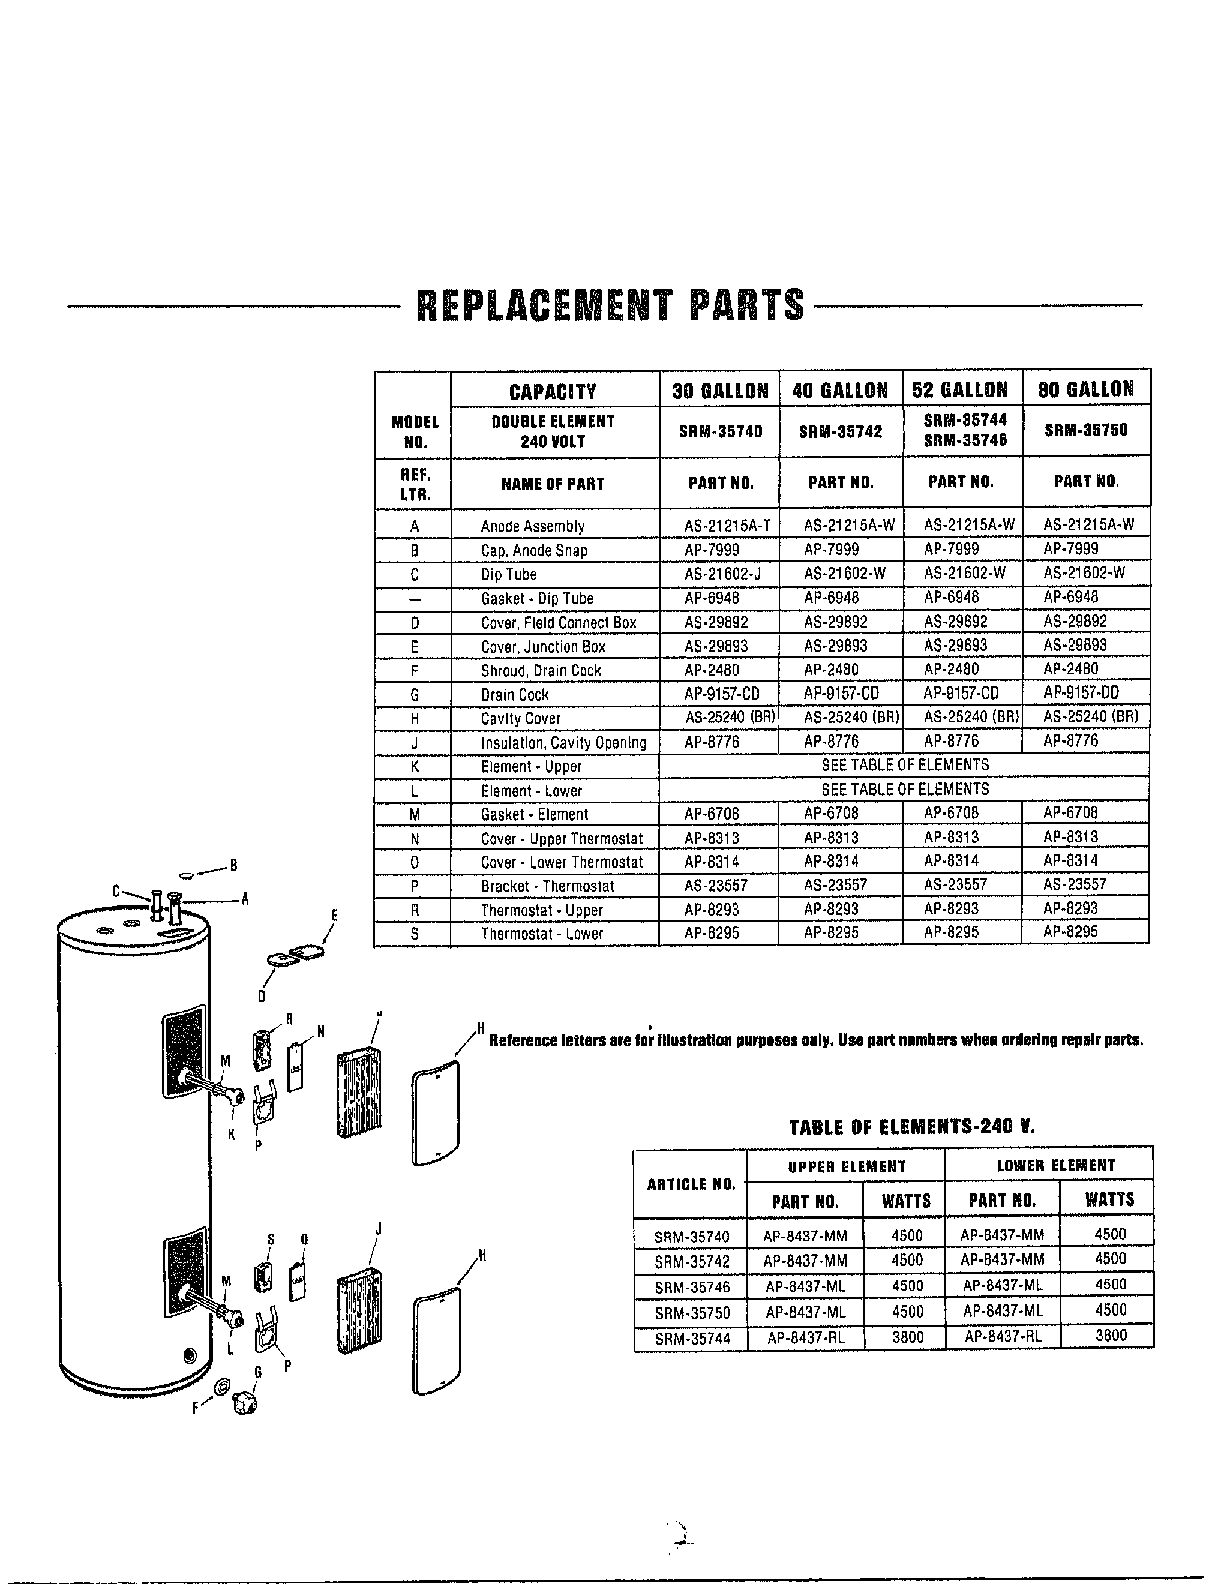 Water Heater  Replacement Parts Diagram  U0026 Parts List For